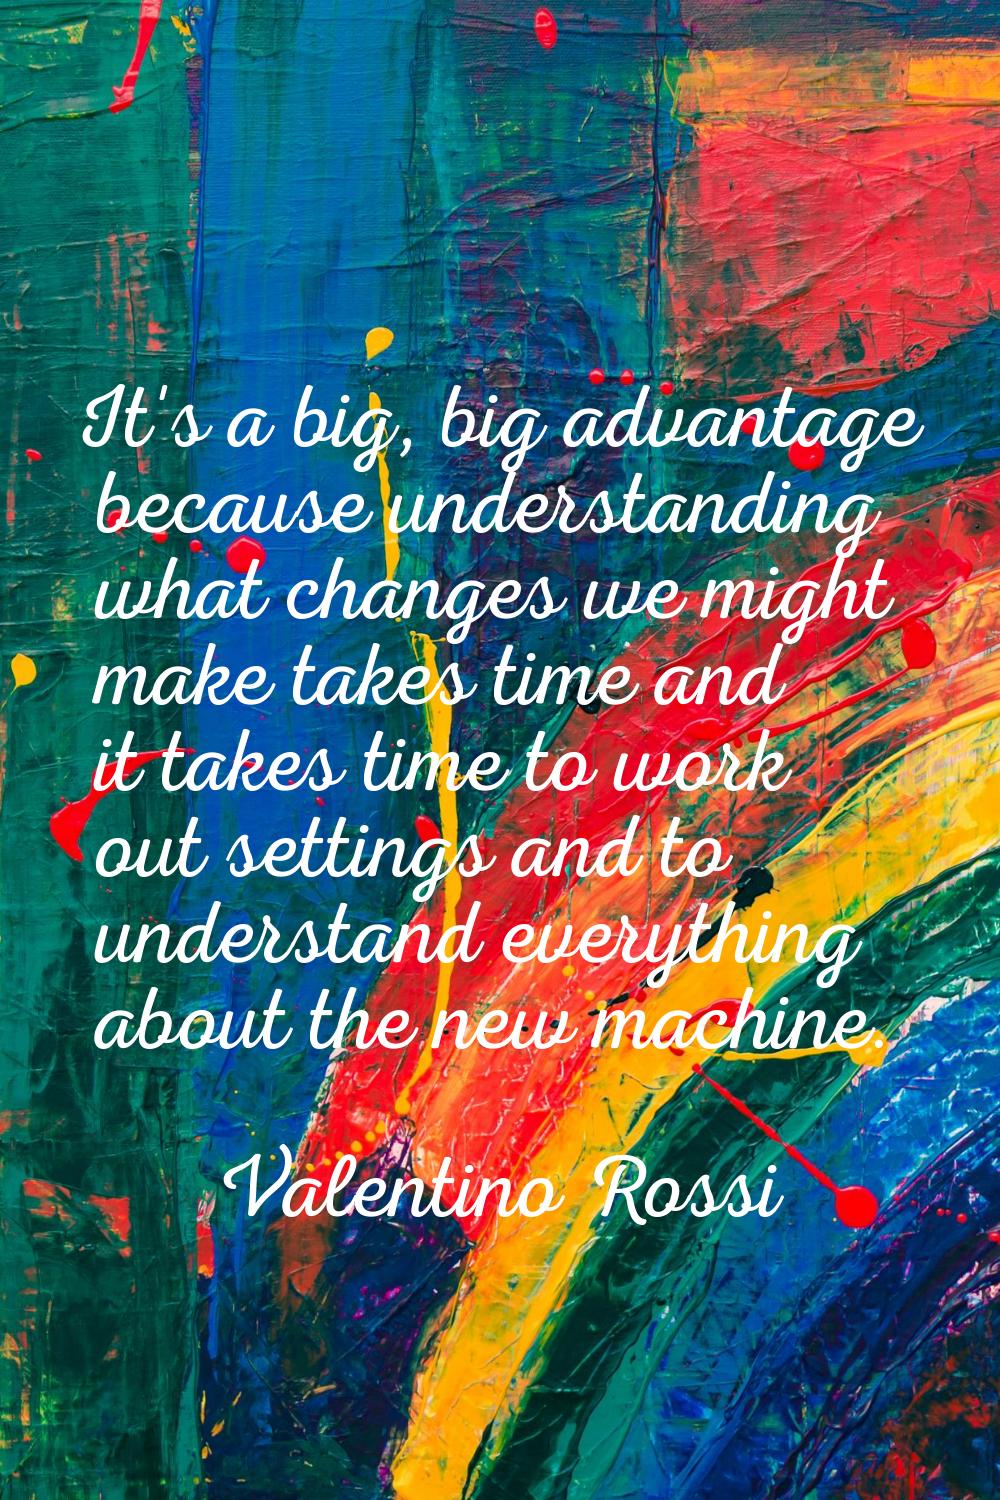 It's a big, big advantage because understanding what changes we might make takes time and it takes 